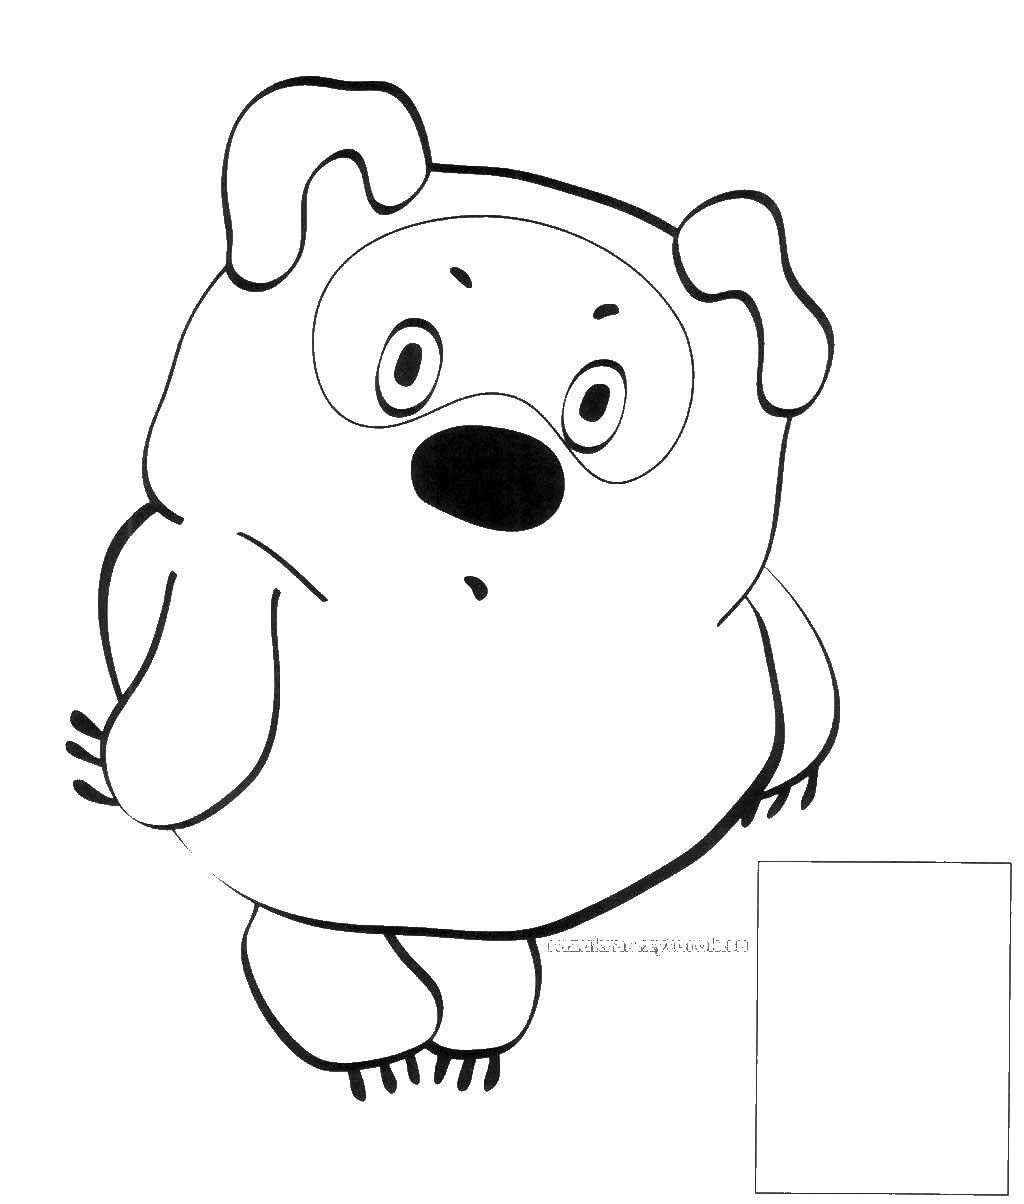 Coloring Winnie the Pooh. Category Soviet coloring. Tags:  Decorate.